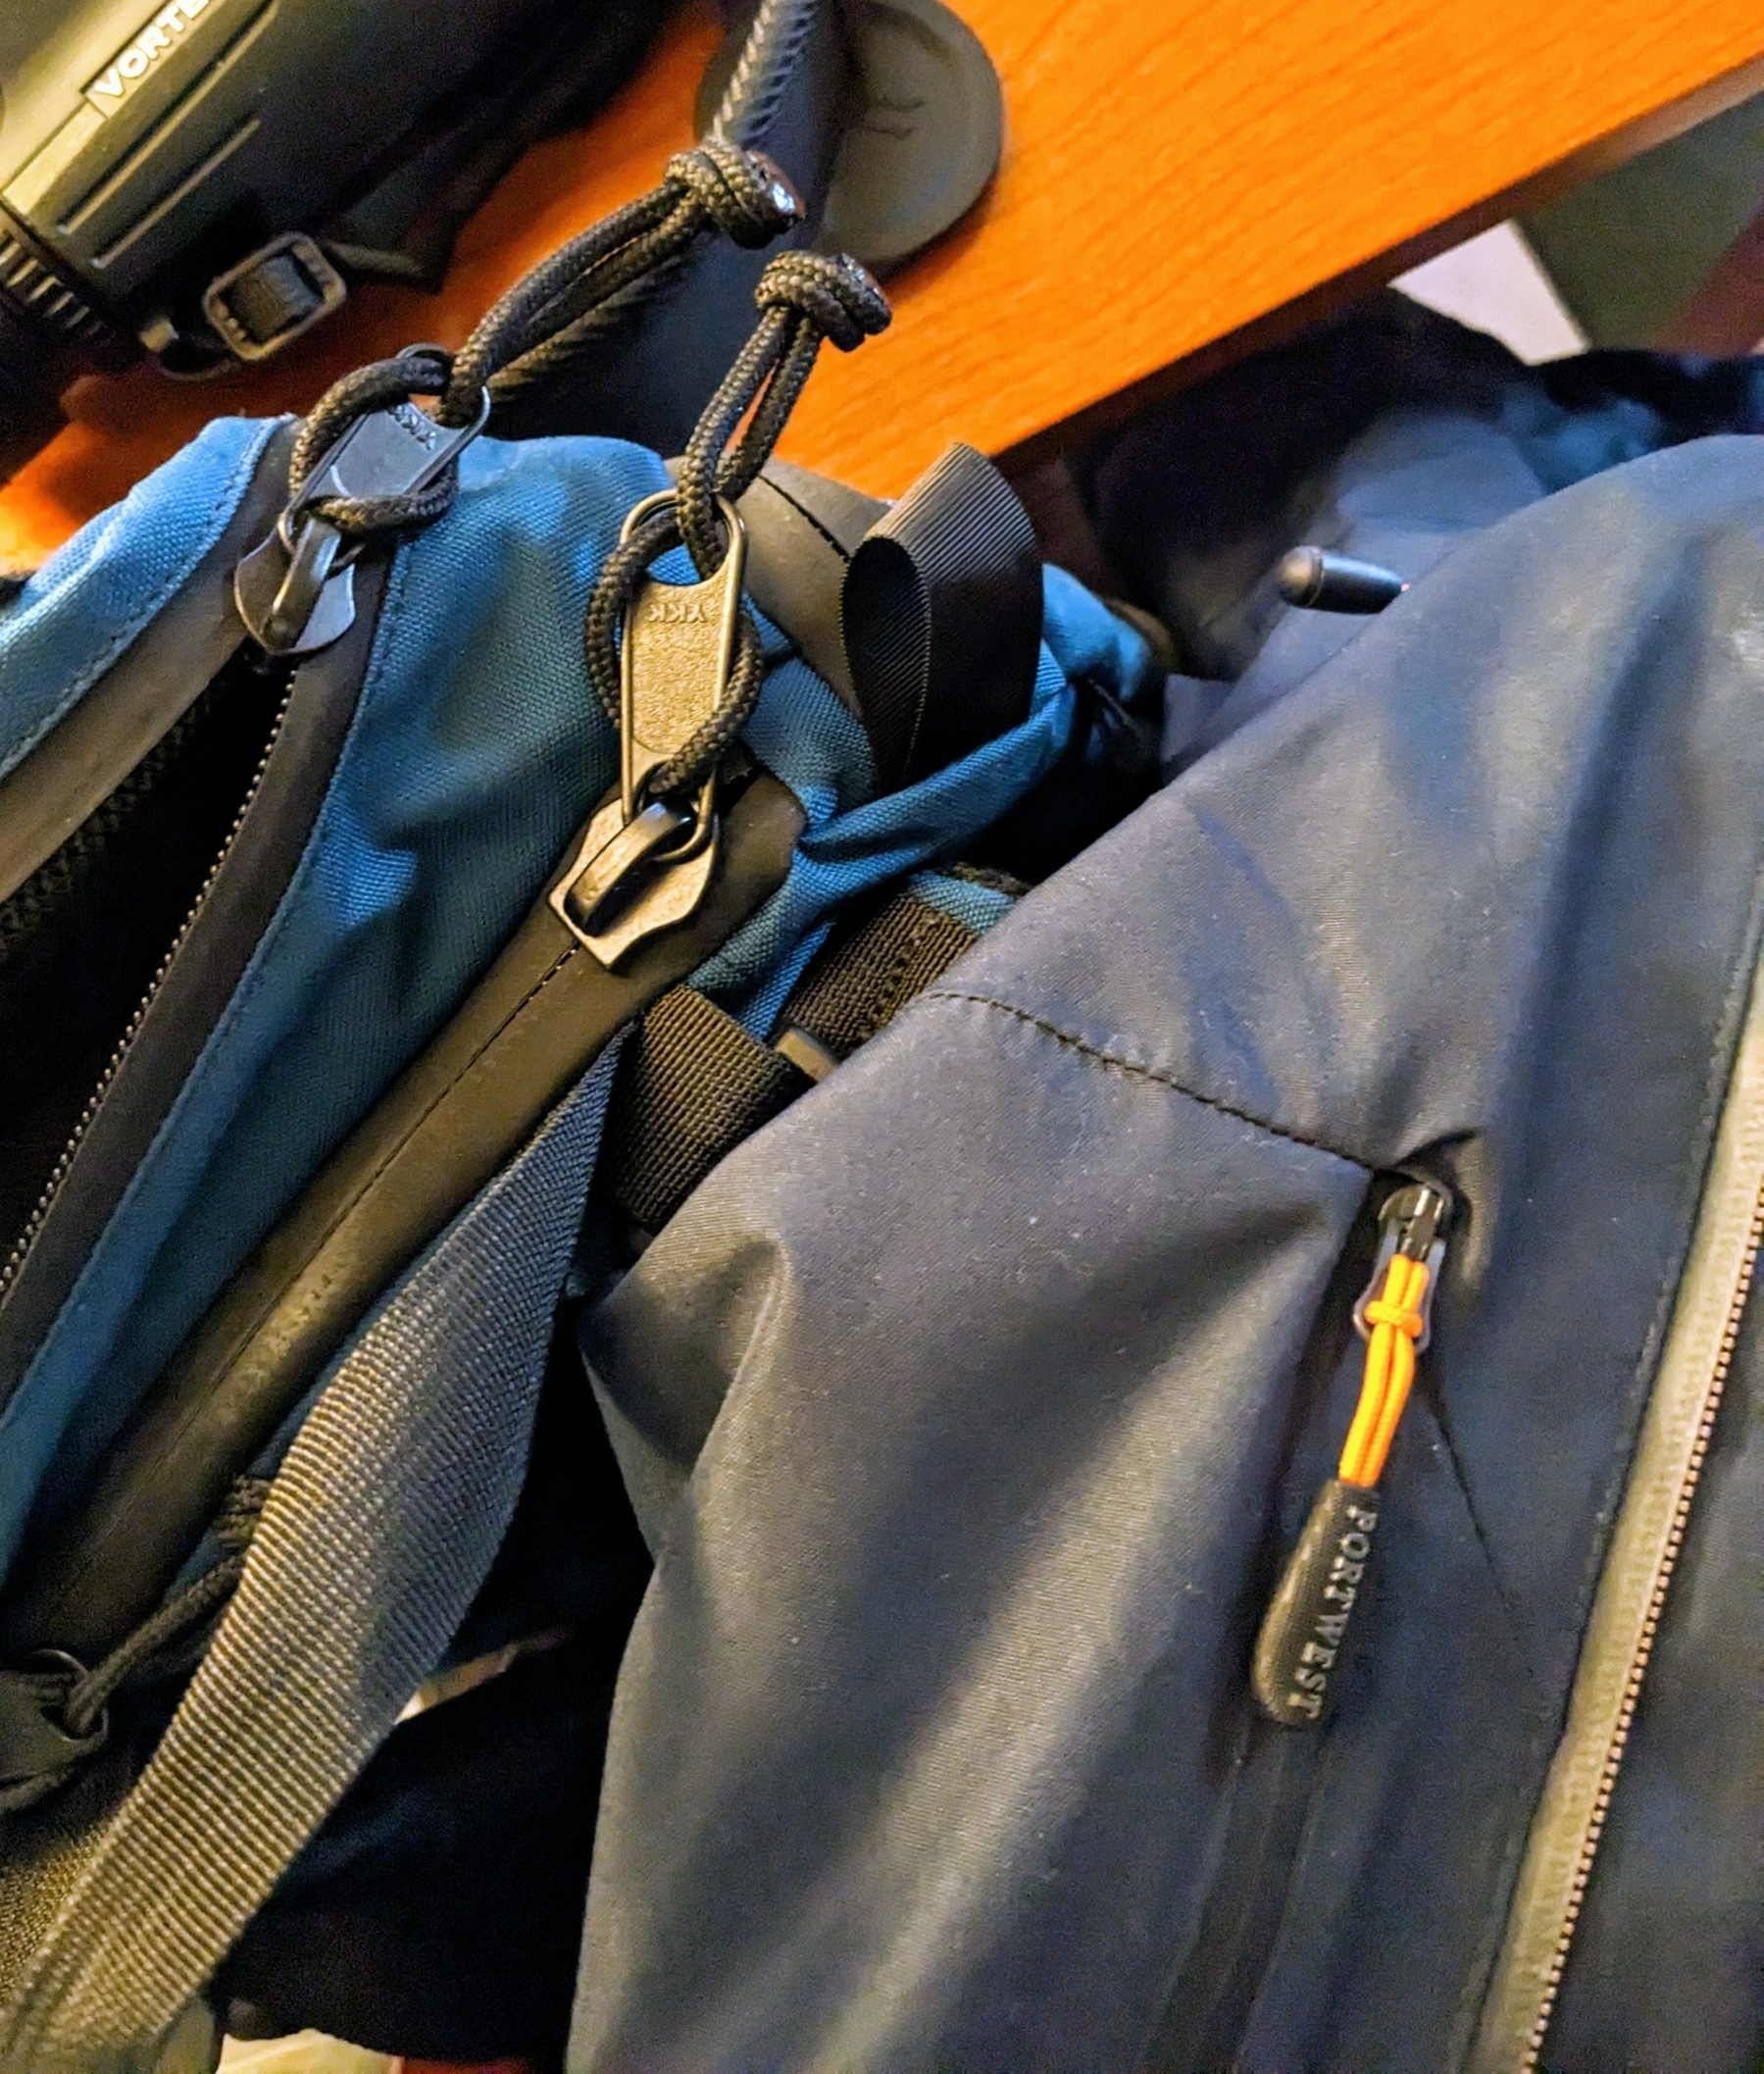 backpack next to a jacket, with zippers showing